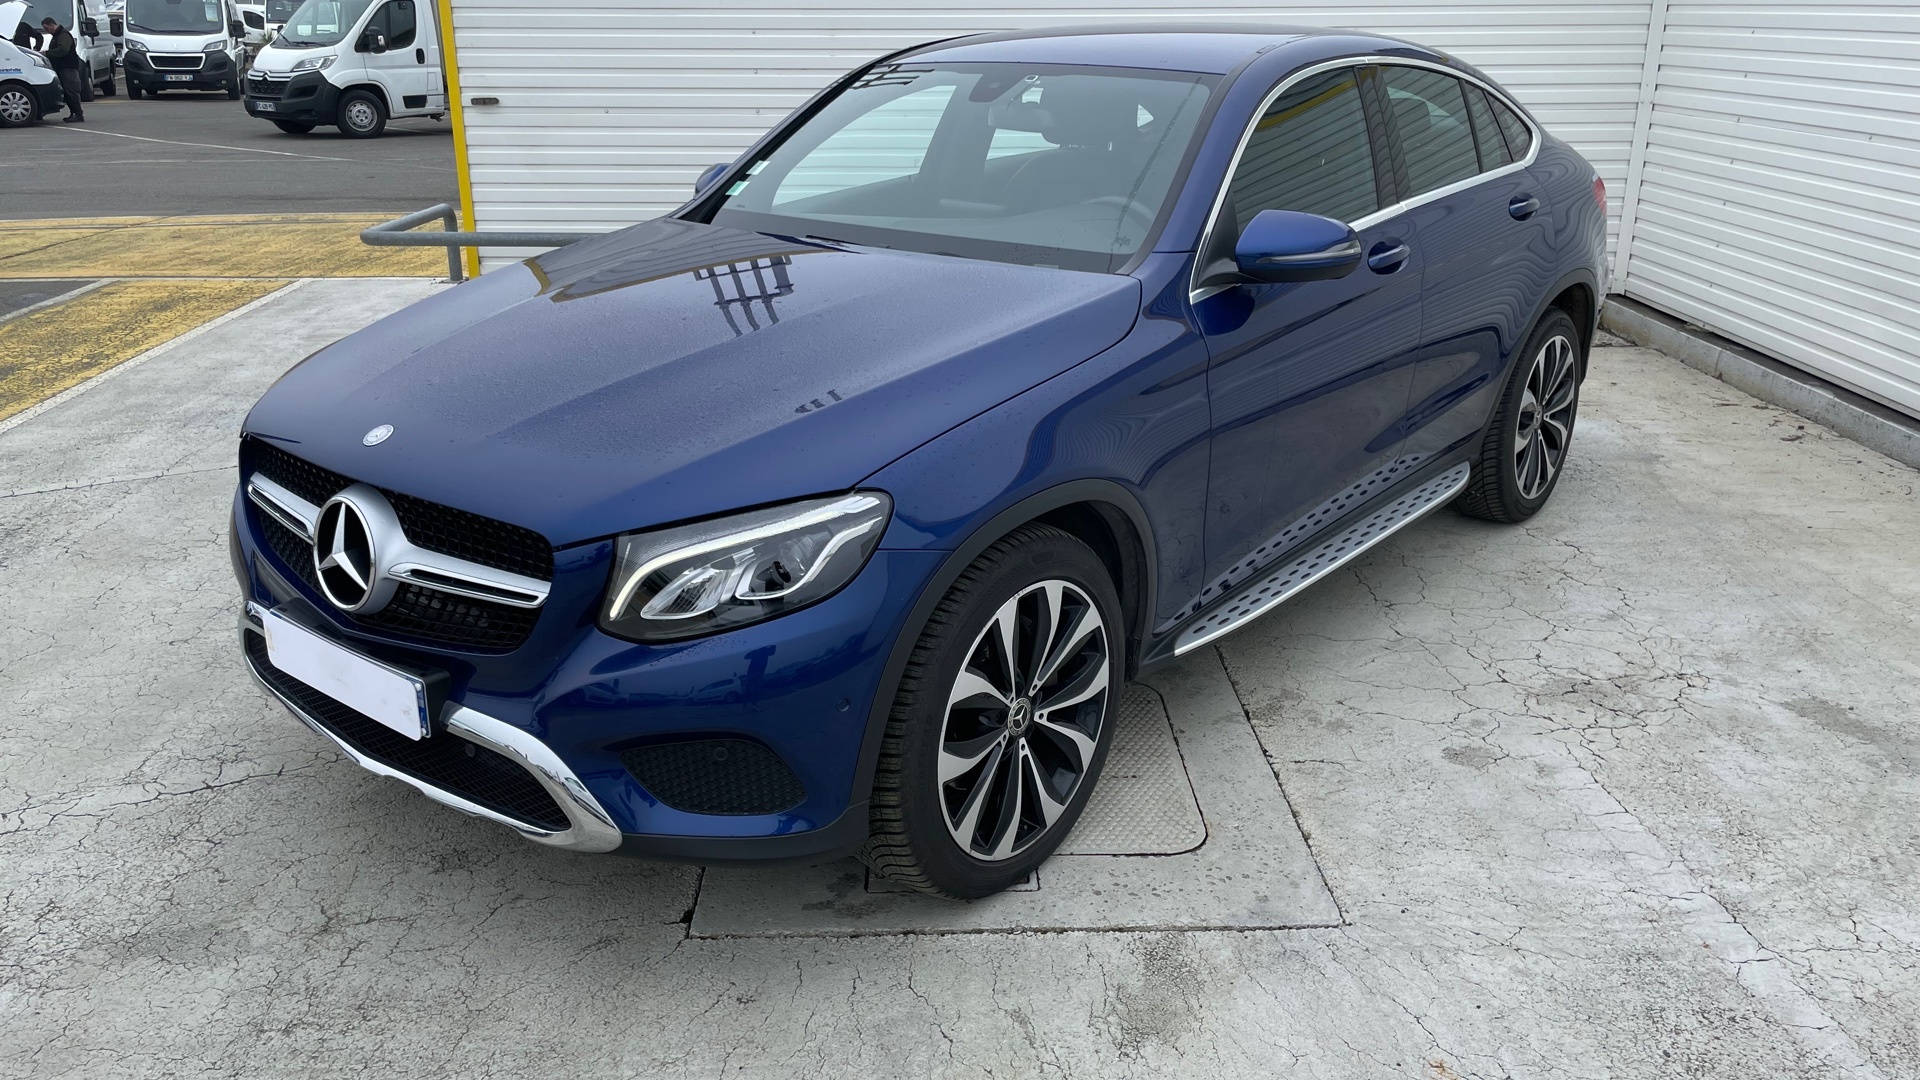 Mercedes GLC COUPE 220 d 9g-tronic 4matic executive